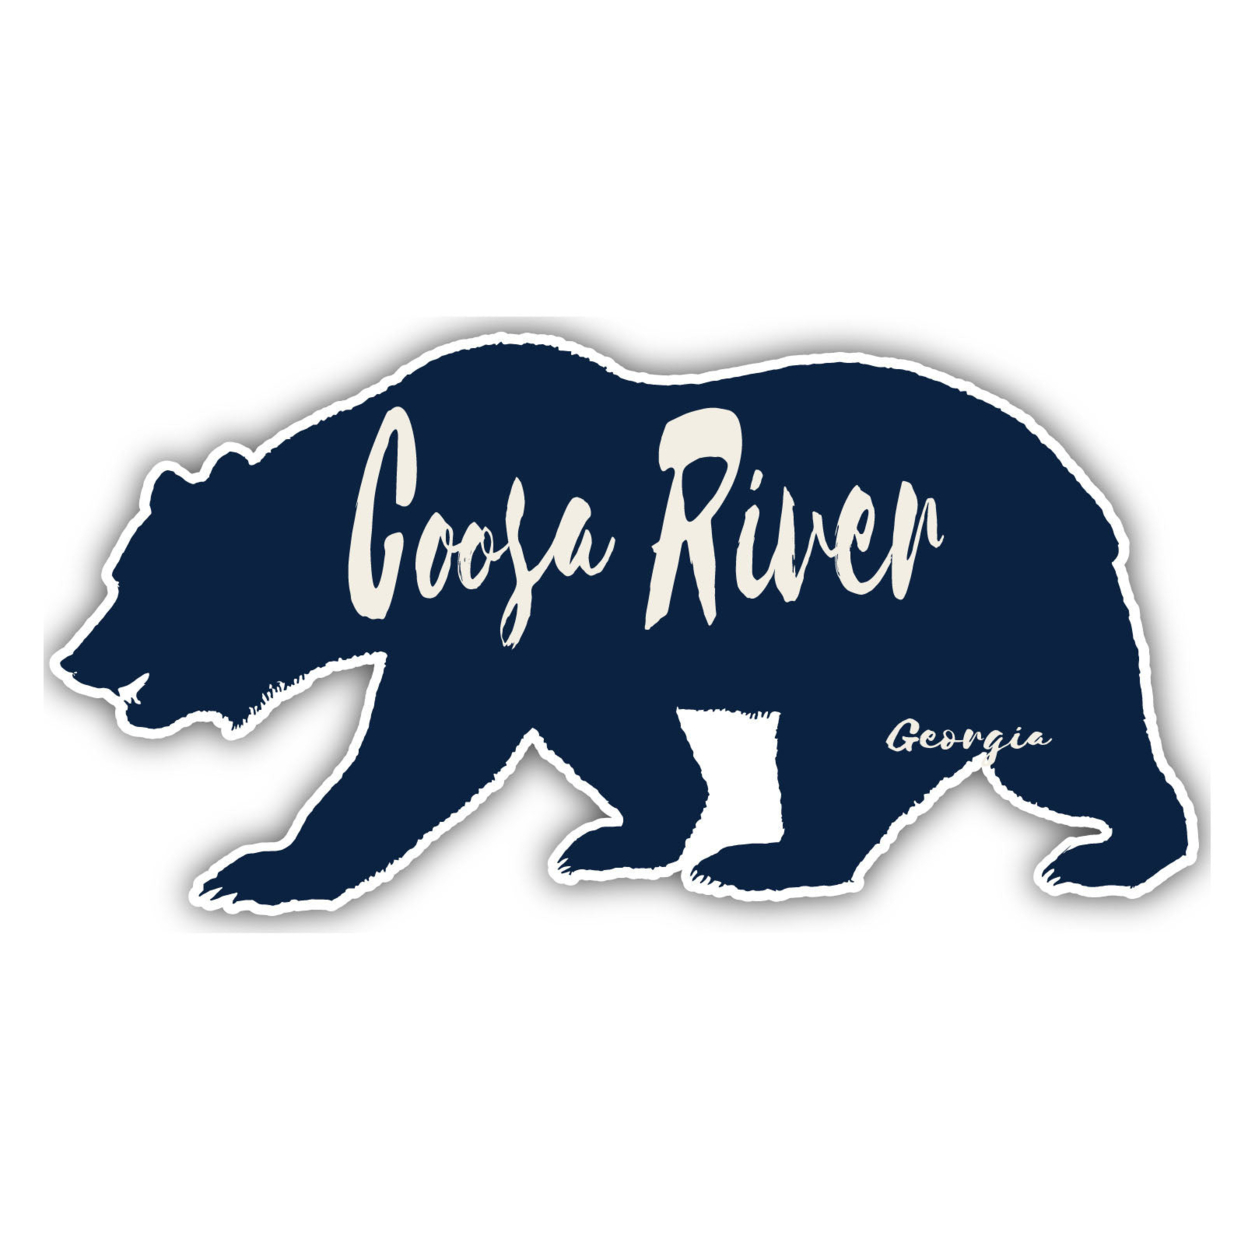 Coosa River Georgia Souvenir Decorative Stickers (Choose Theme And Size) - 4-Pack, 10-Inch, Bear